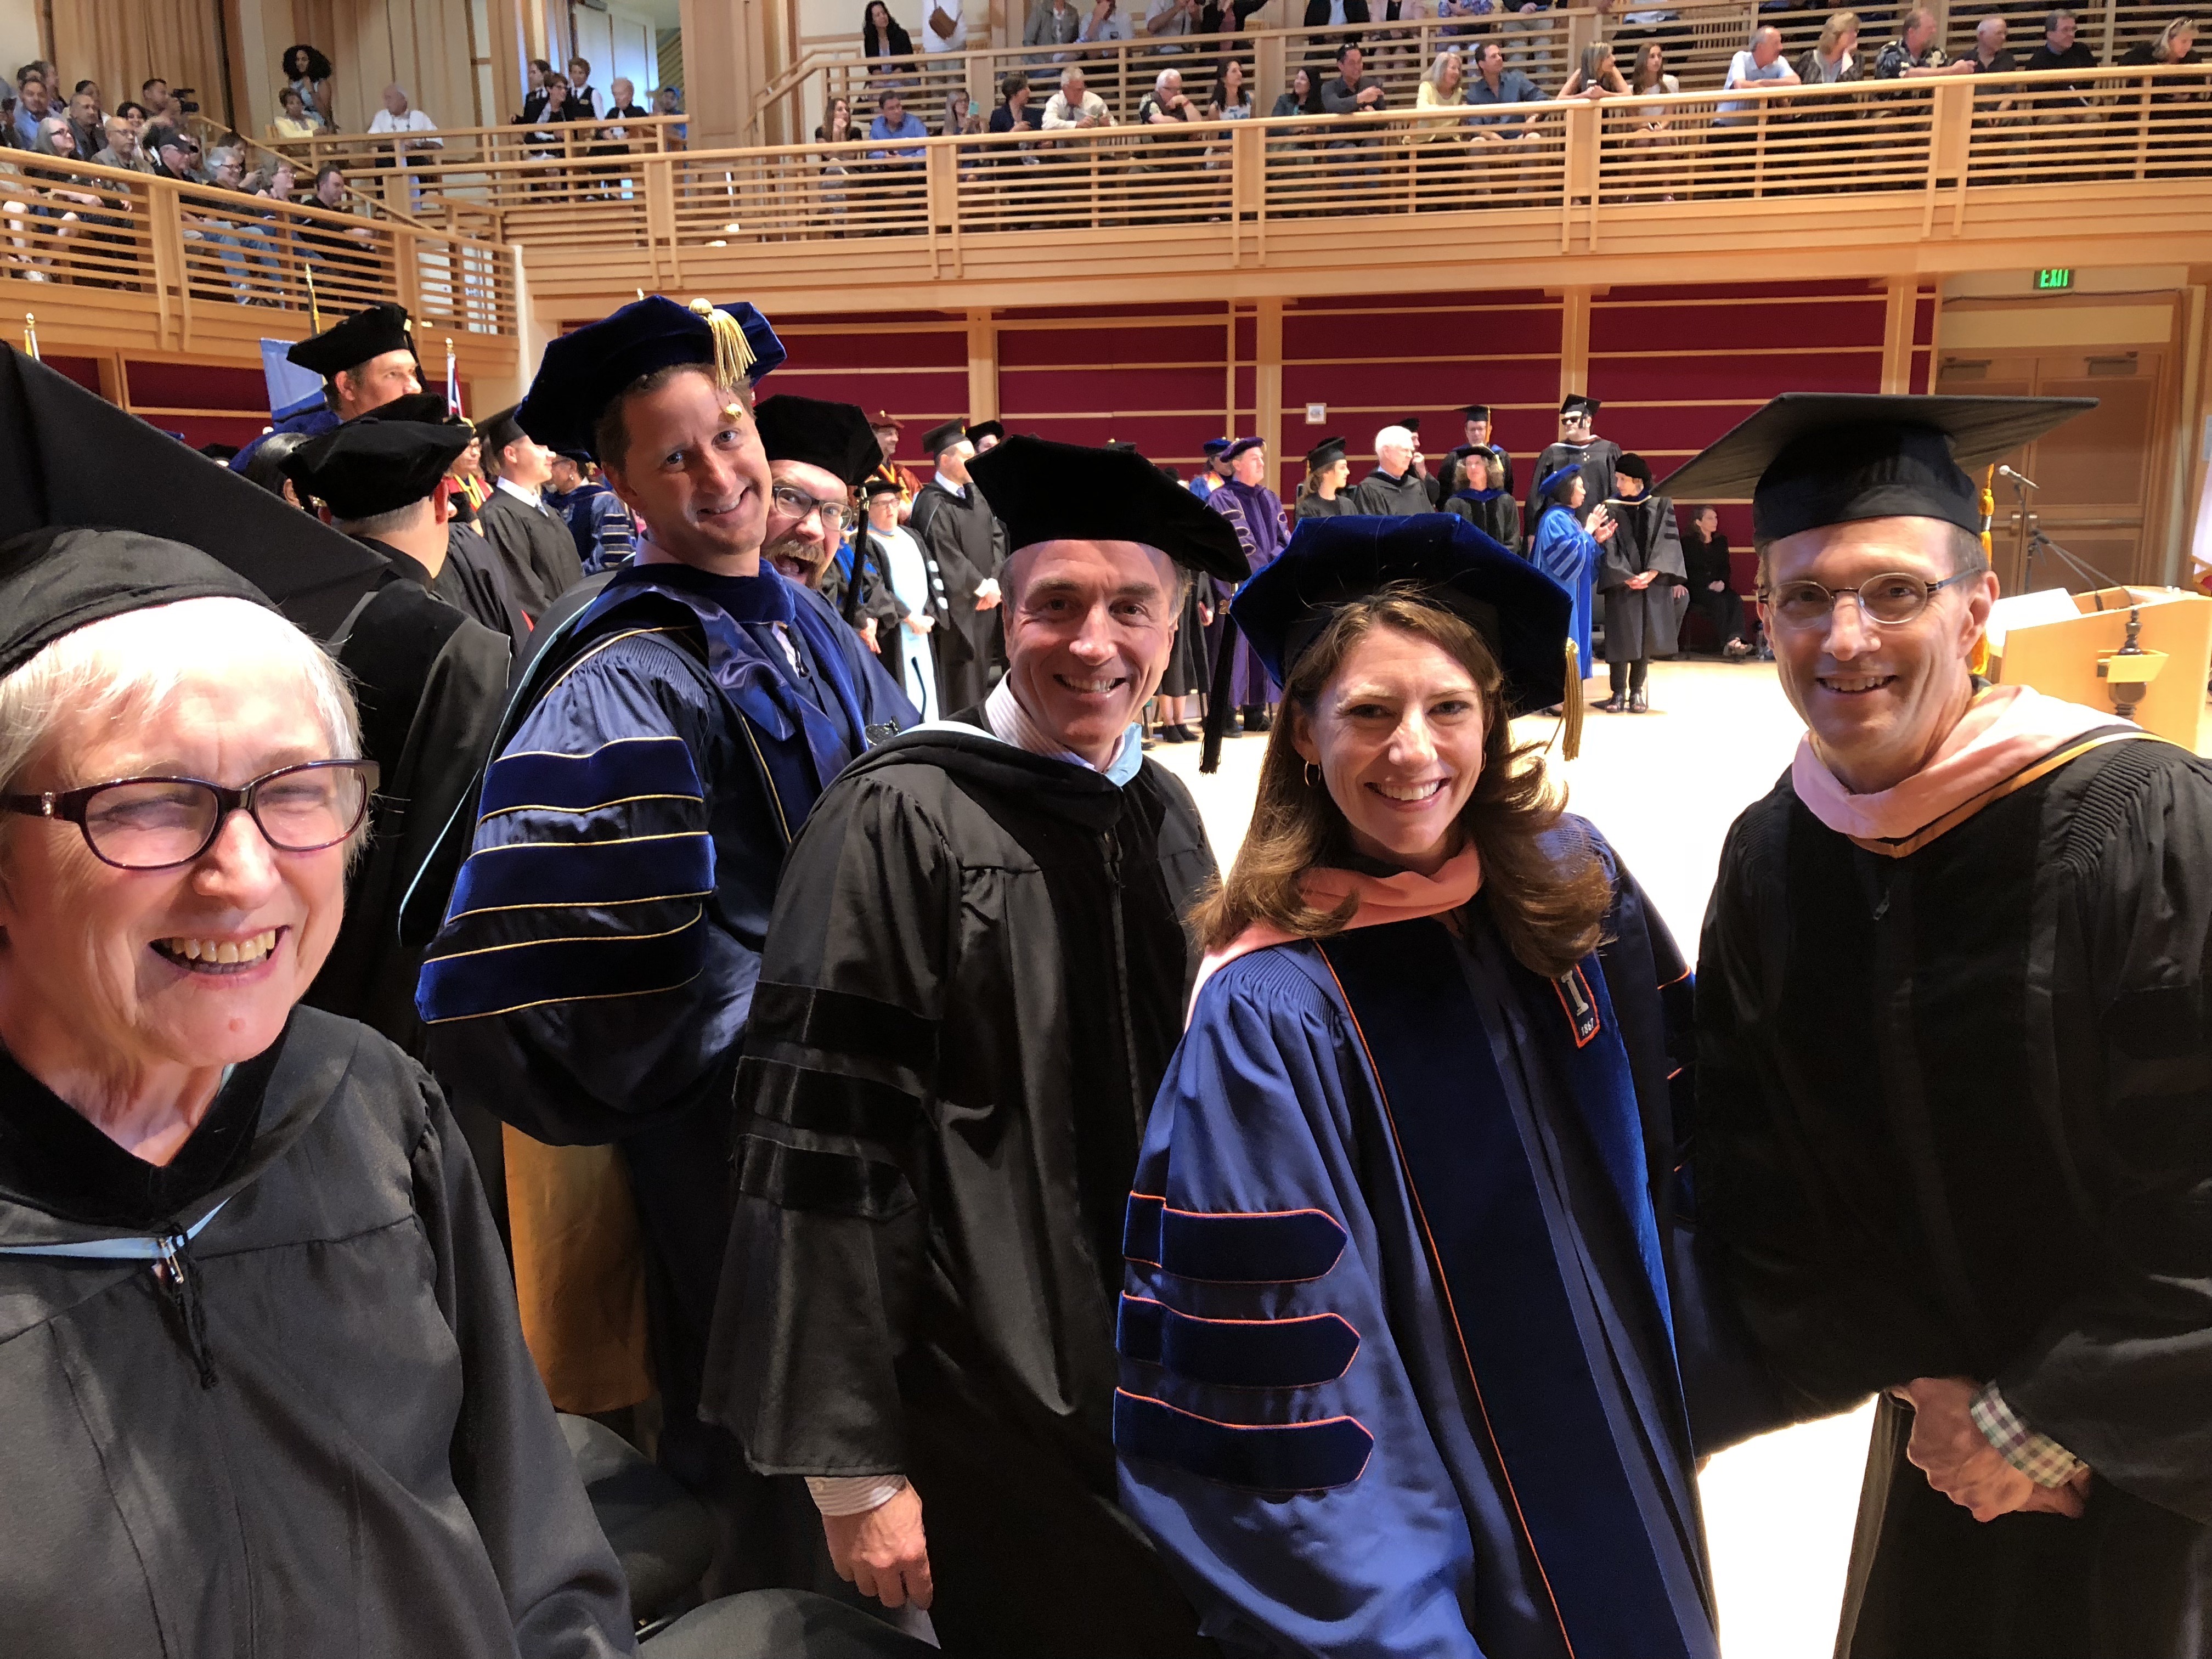 Faculty dressed in graduation regalia on stage in Weill Hall